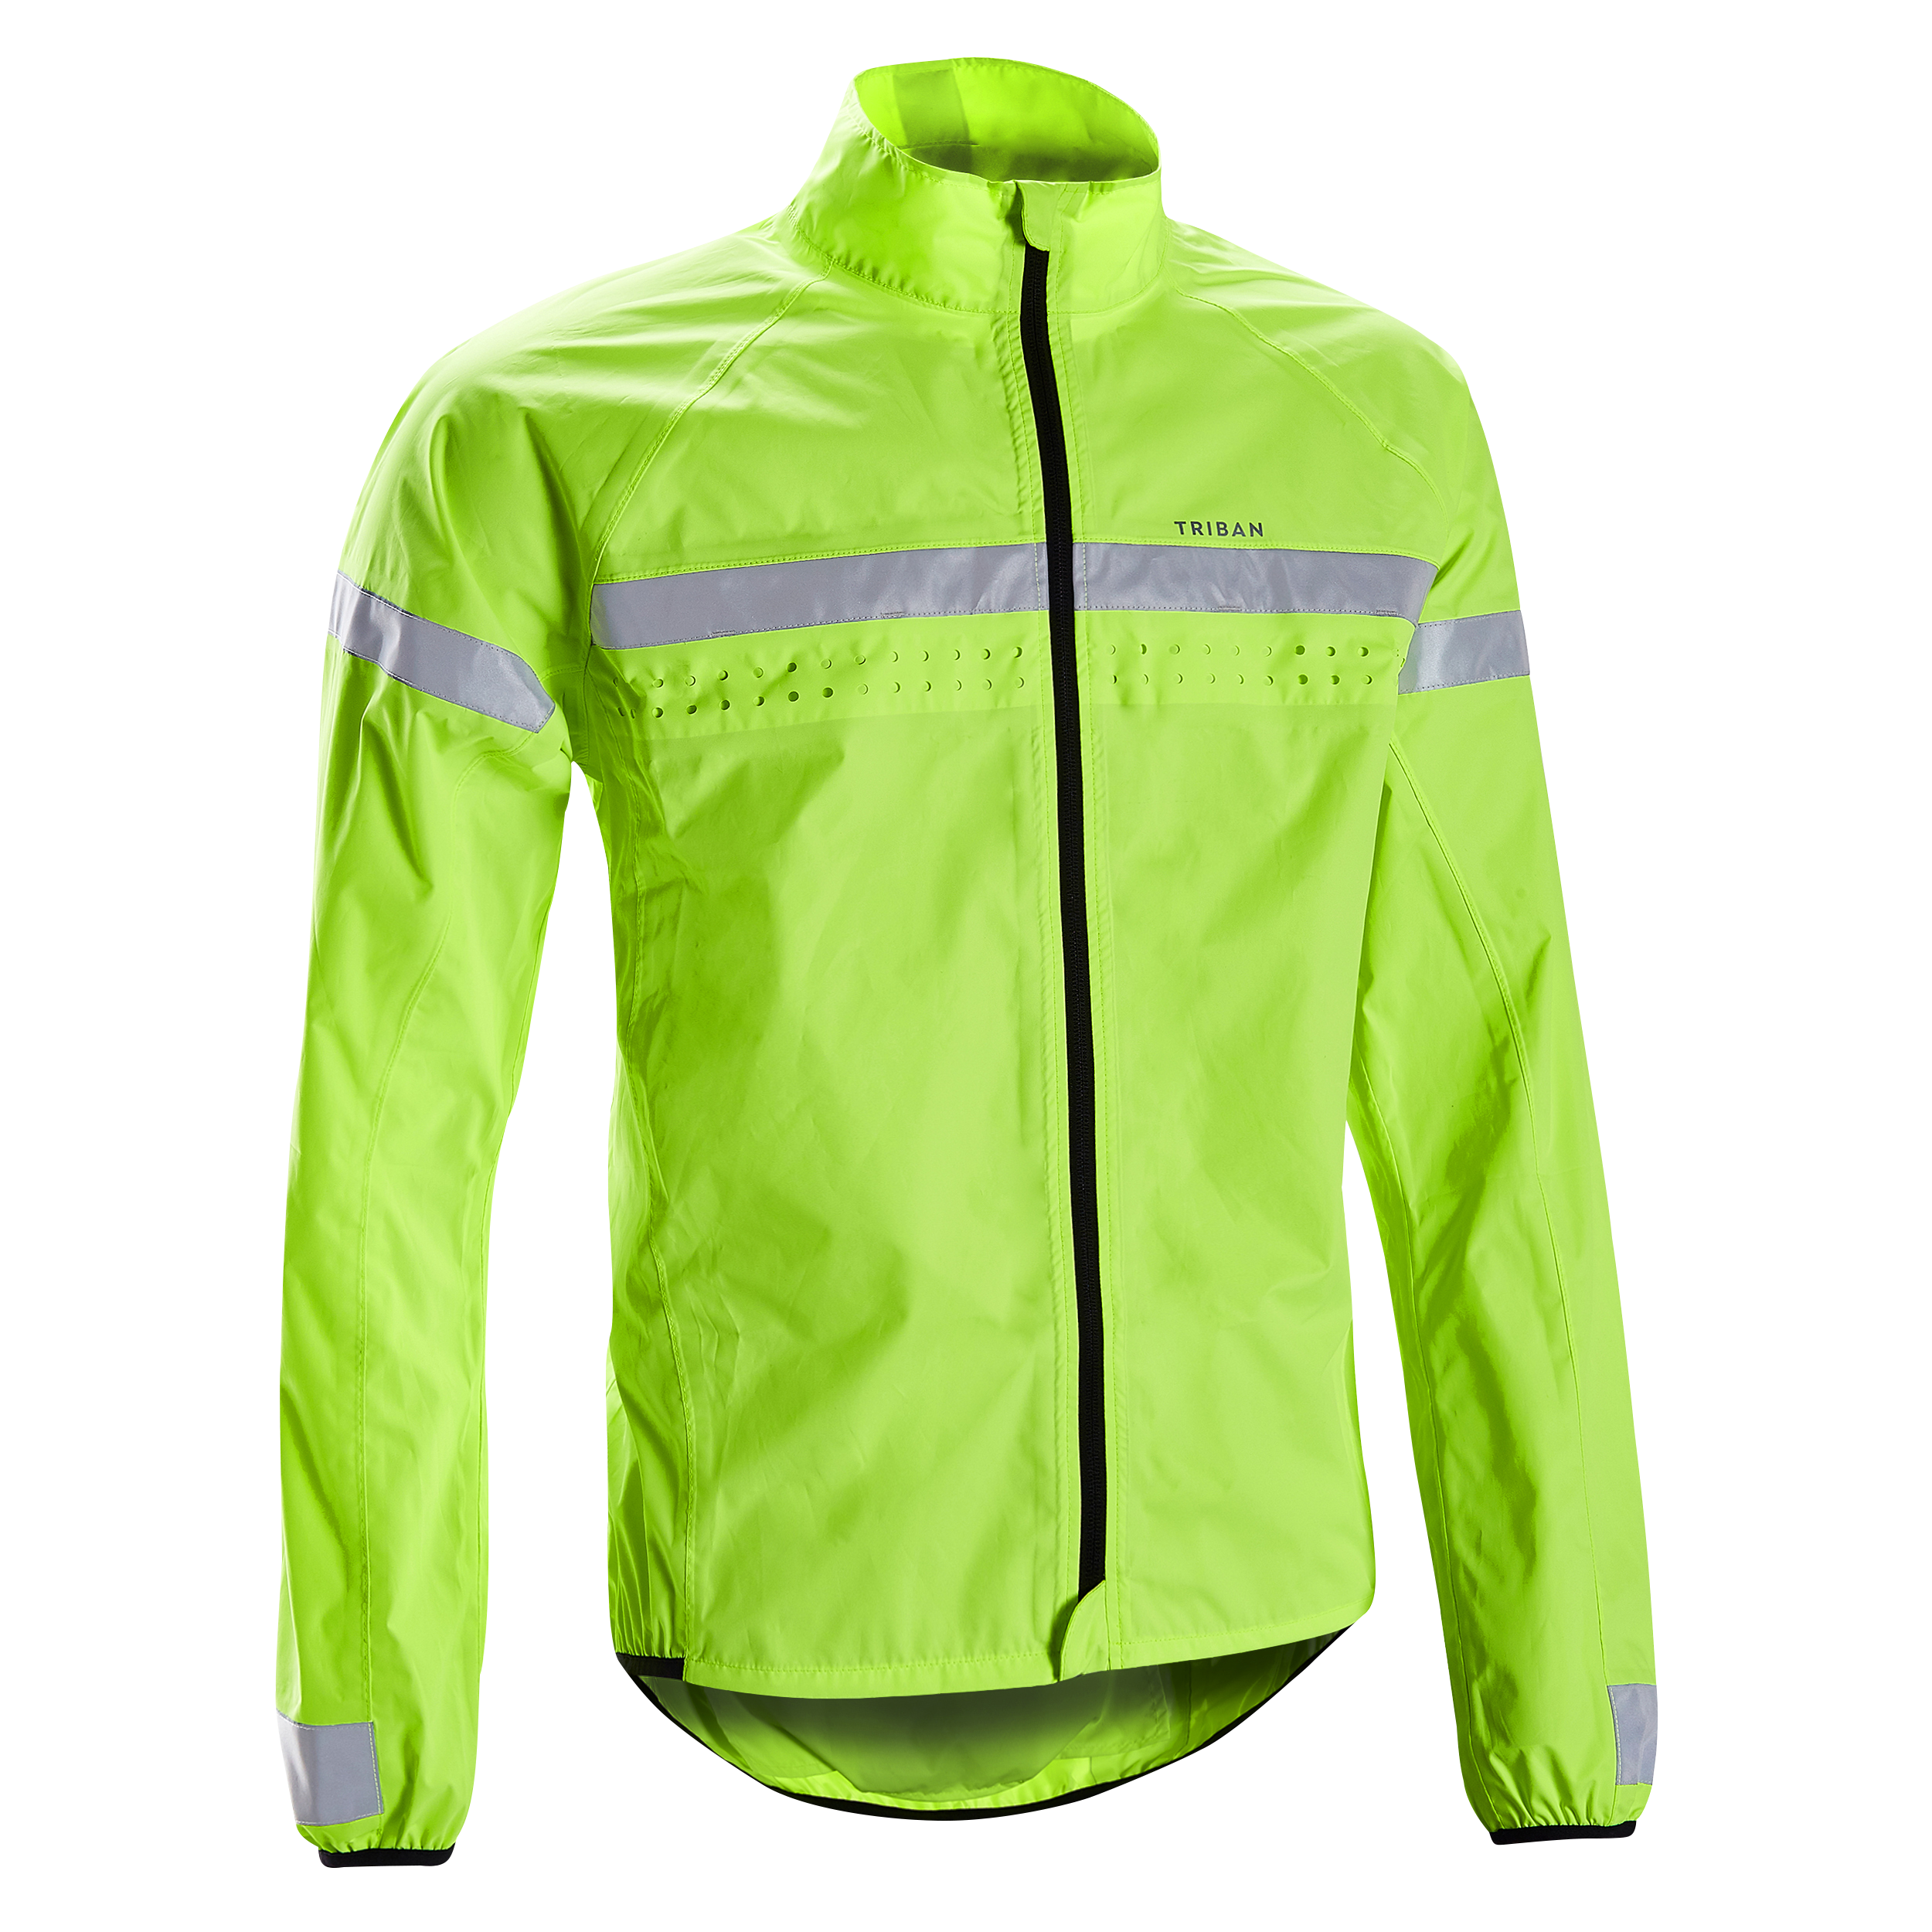 Details about   High Visibility Reflective Cycling Vest Bicycle Jackets Y0E0 Z4T5 Bike R2J4 